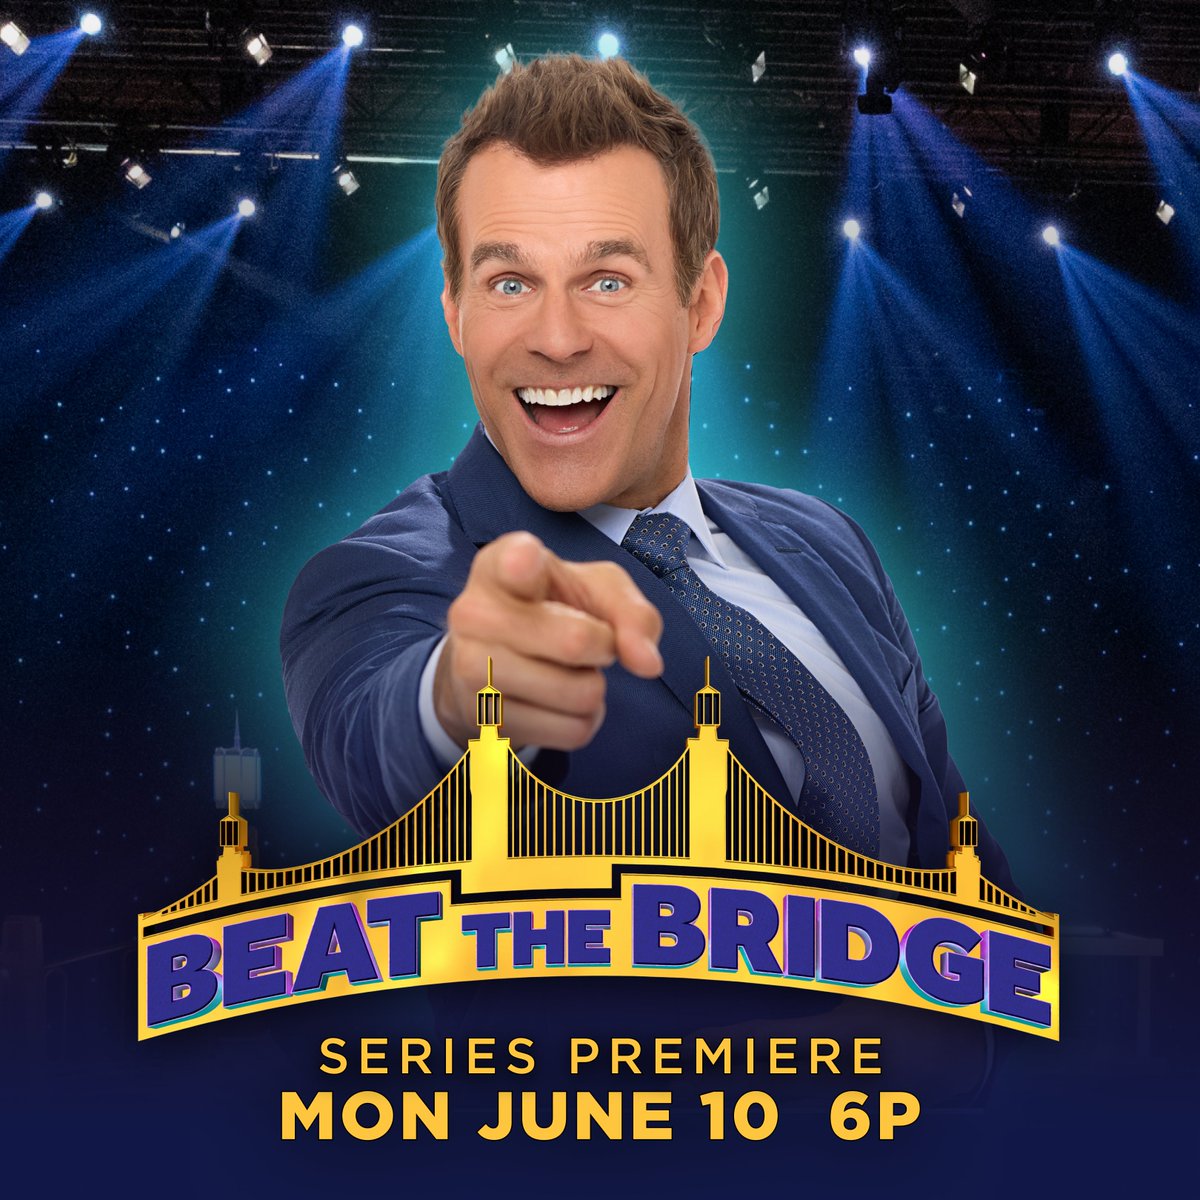 Something big is coming! Mark your calendars for the premiere of #BeatTheBridge with @CameronMathison on Monday June 10 at 6p only on Game Show Network!